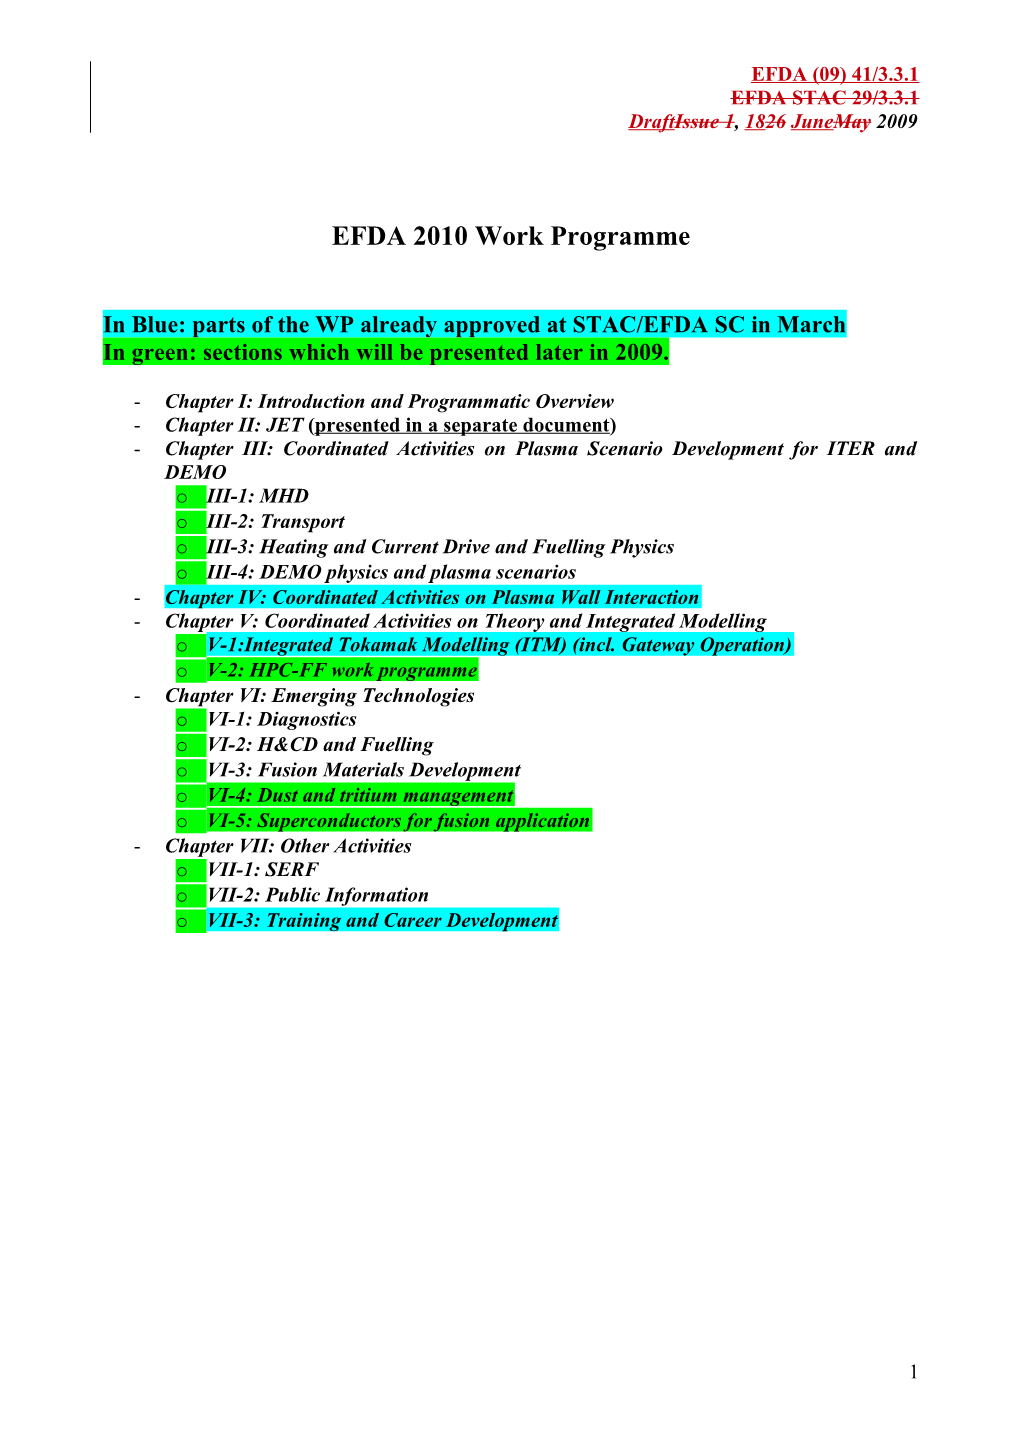 Structure of the EFDA 2010/2011 Work Programme